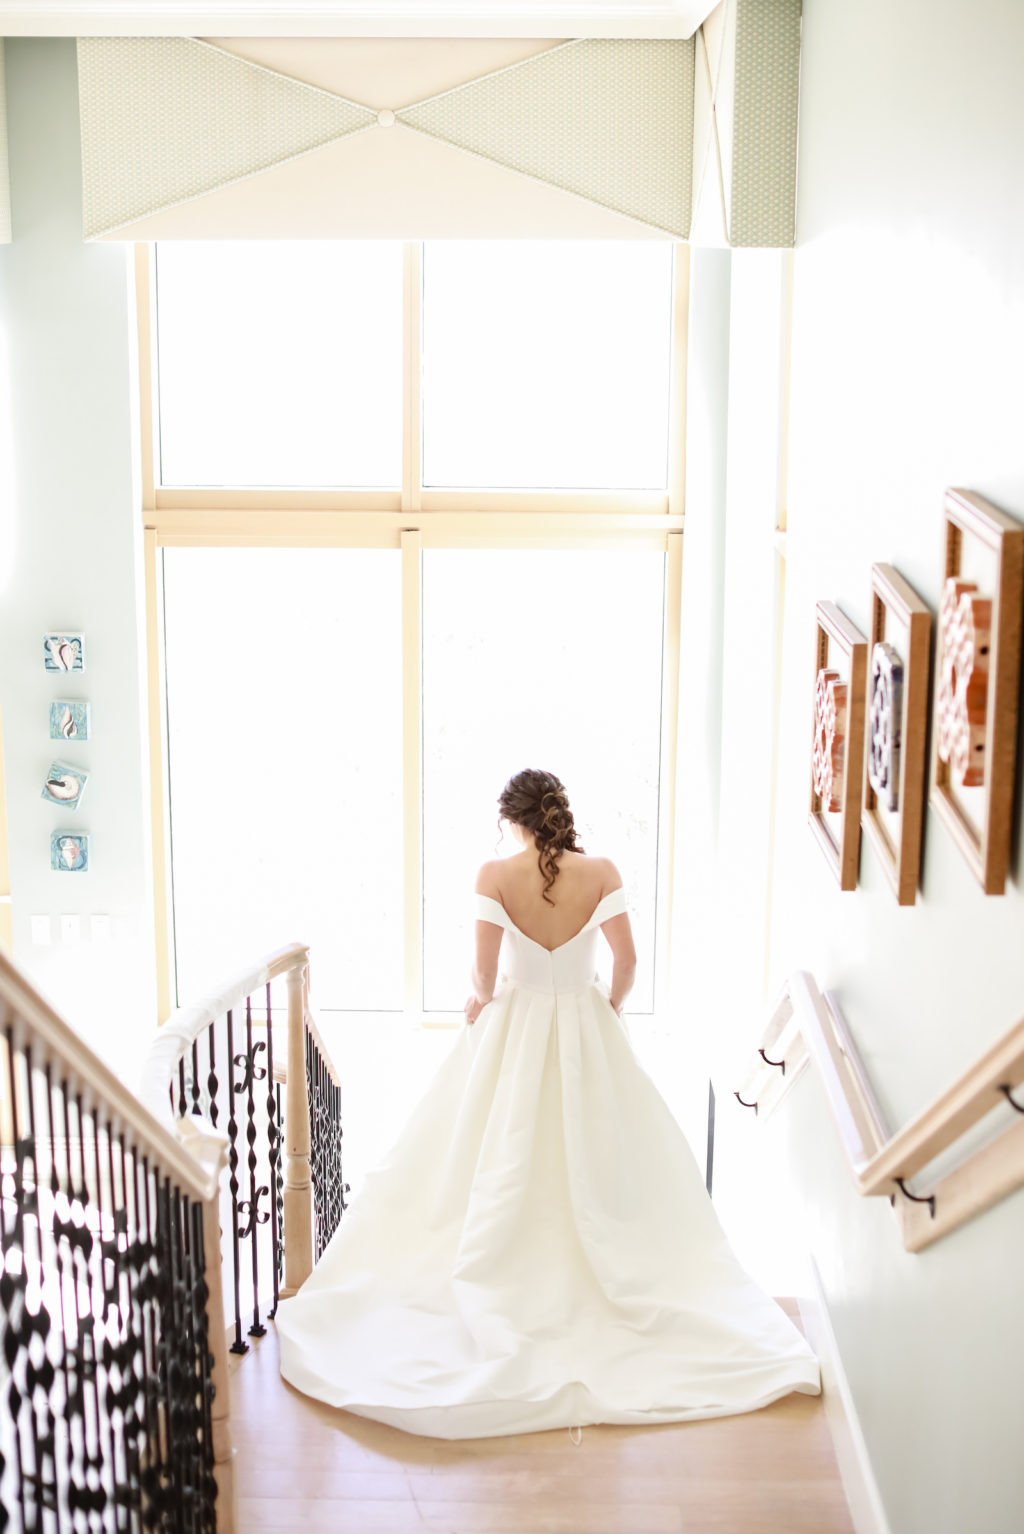 Elegant Classic Bride on Staircase Wearing Open Back off the Shoulder Straps A-Line Wedding Dress | Tampa Bay Wedding Photographer Lifelong Photography Studio | Wedding Hair and Makeup Adore Bridal